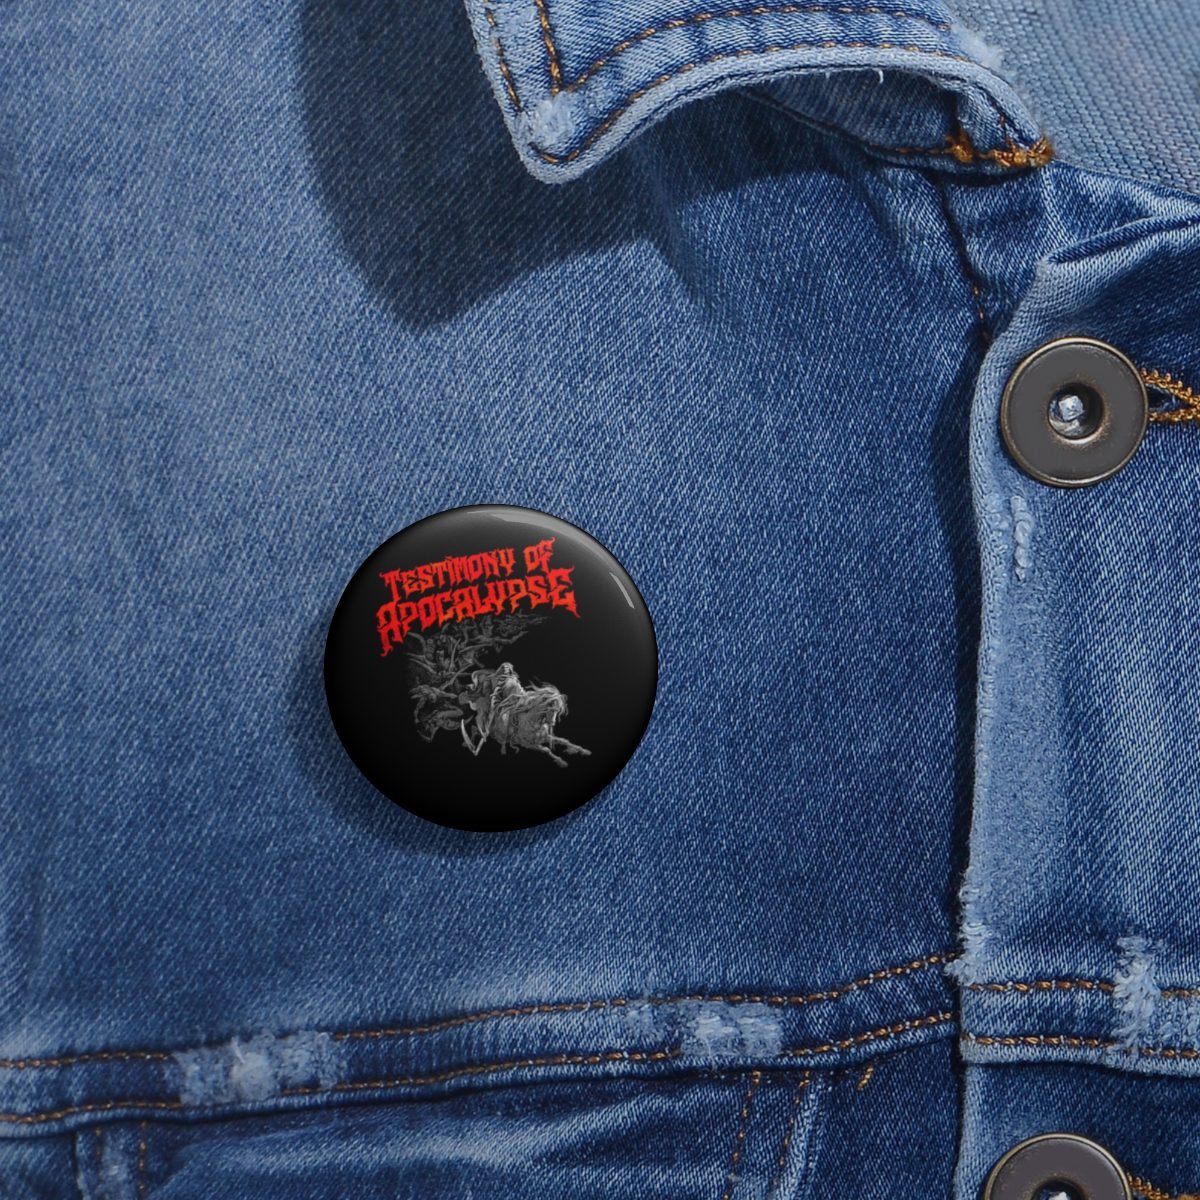 Testimony of Apocalypse – Deathly Visions Pin Buttons